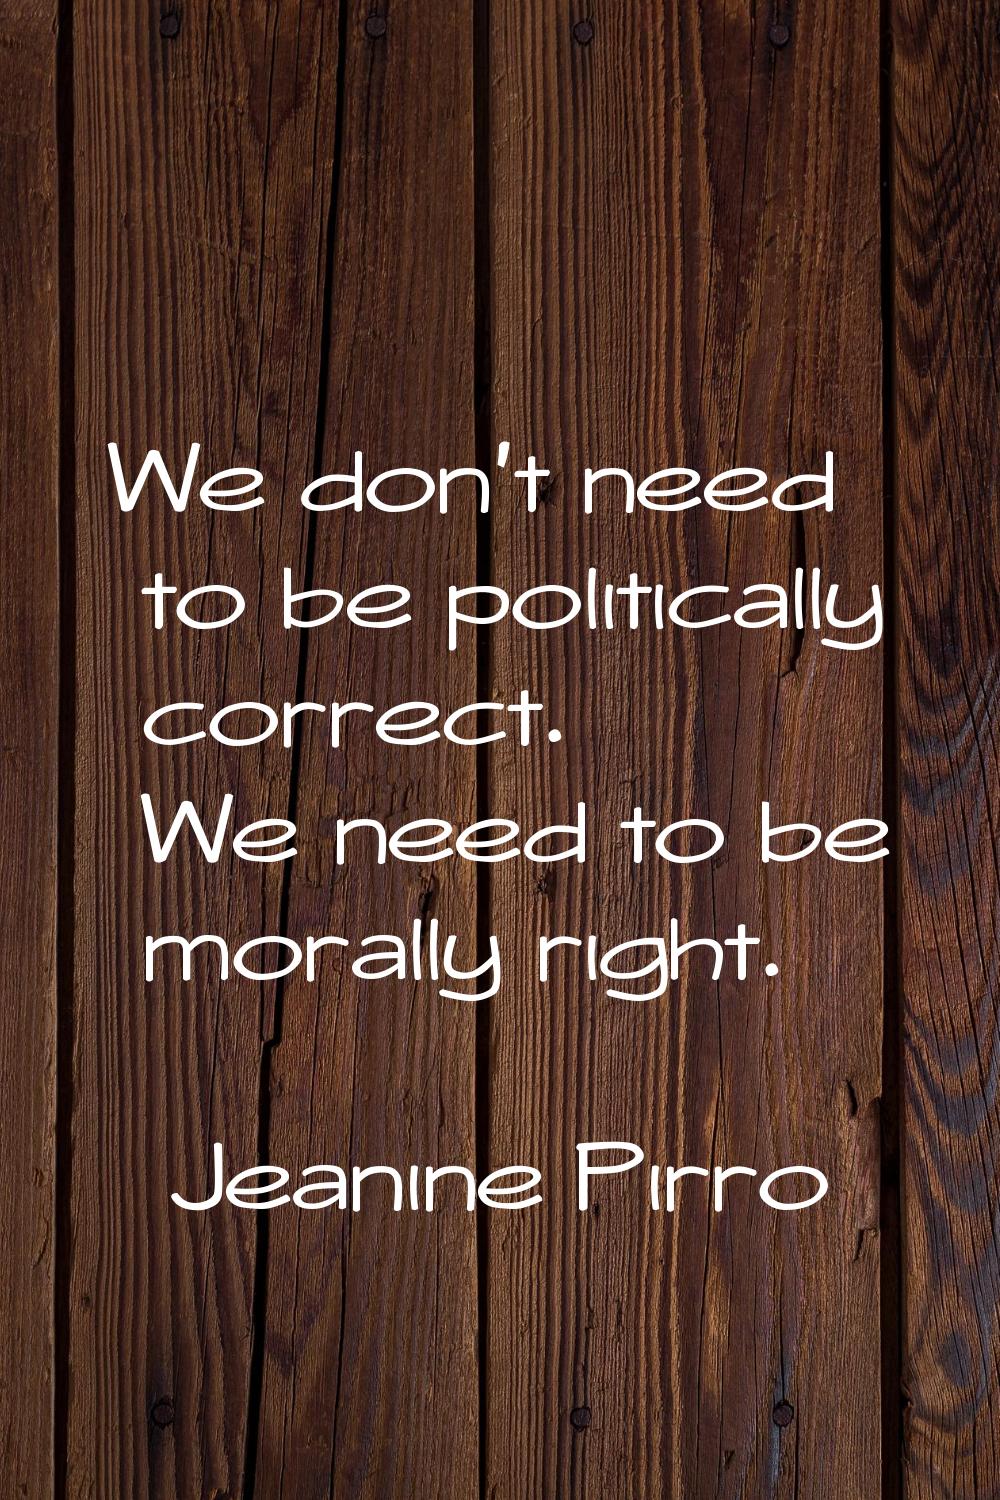 We don't need to be politically correct. We need to be morally right.